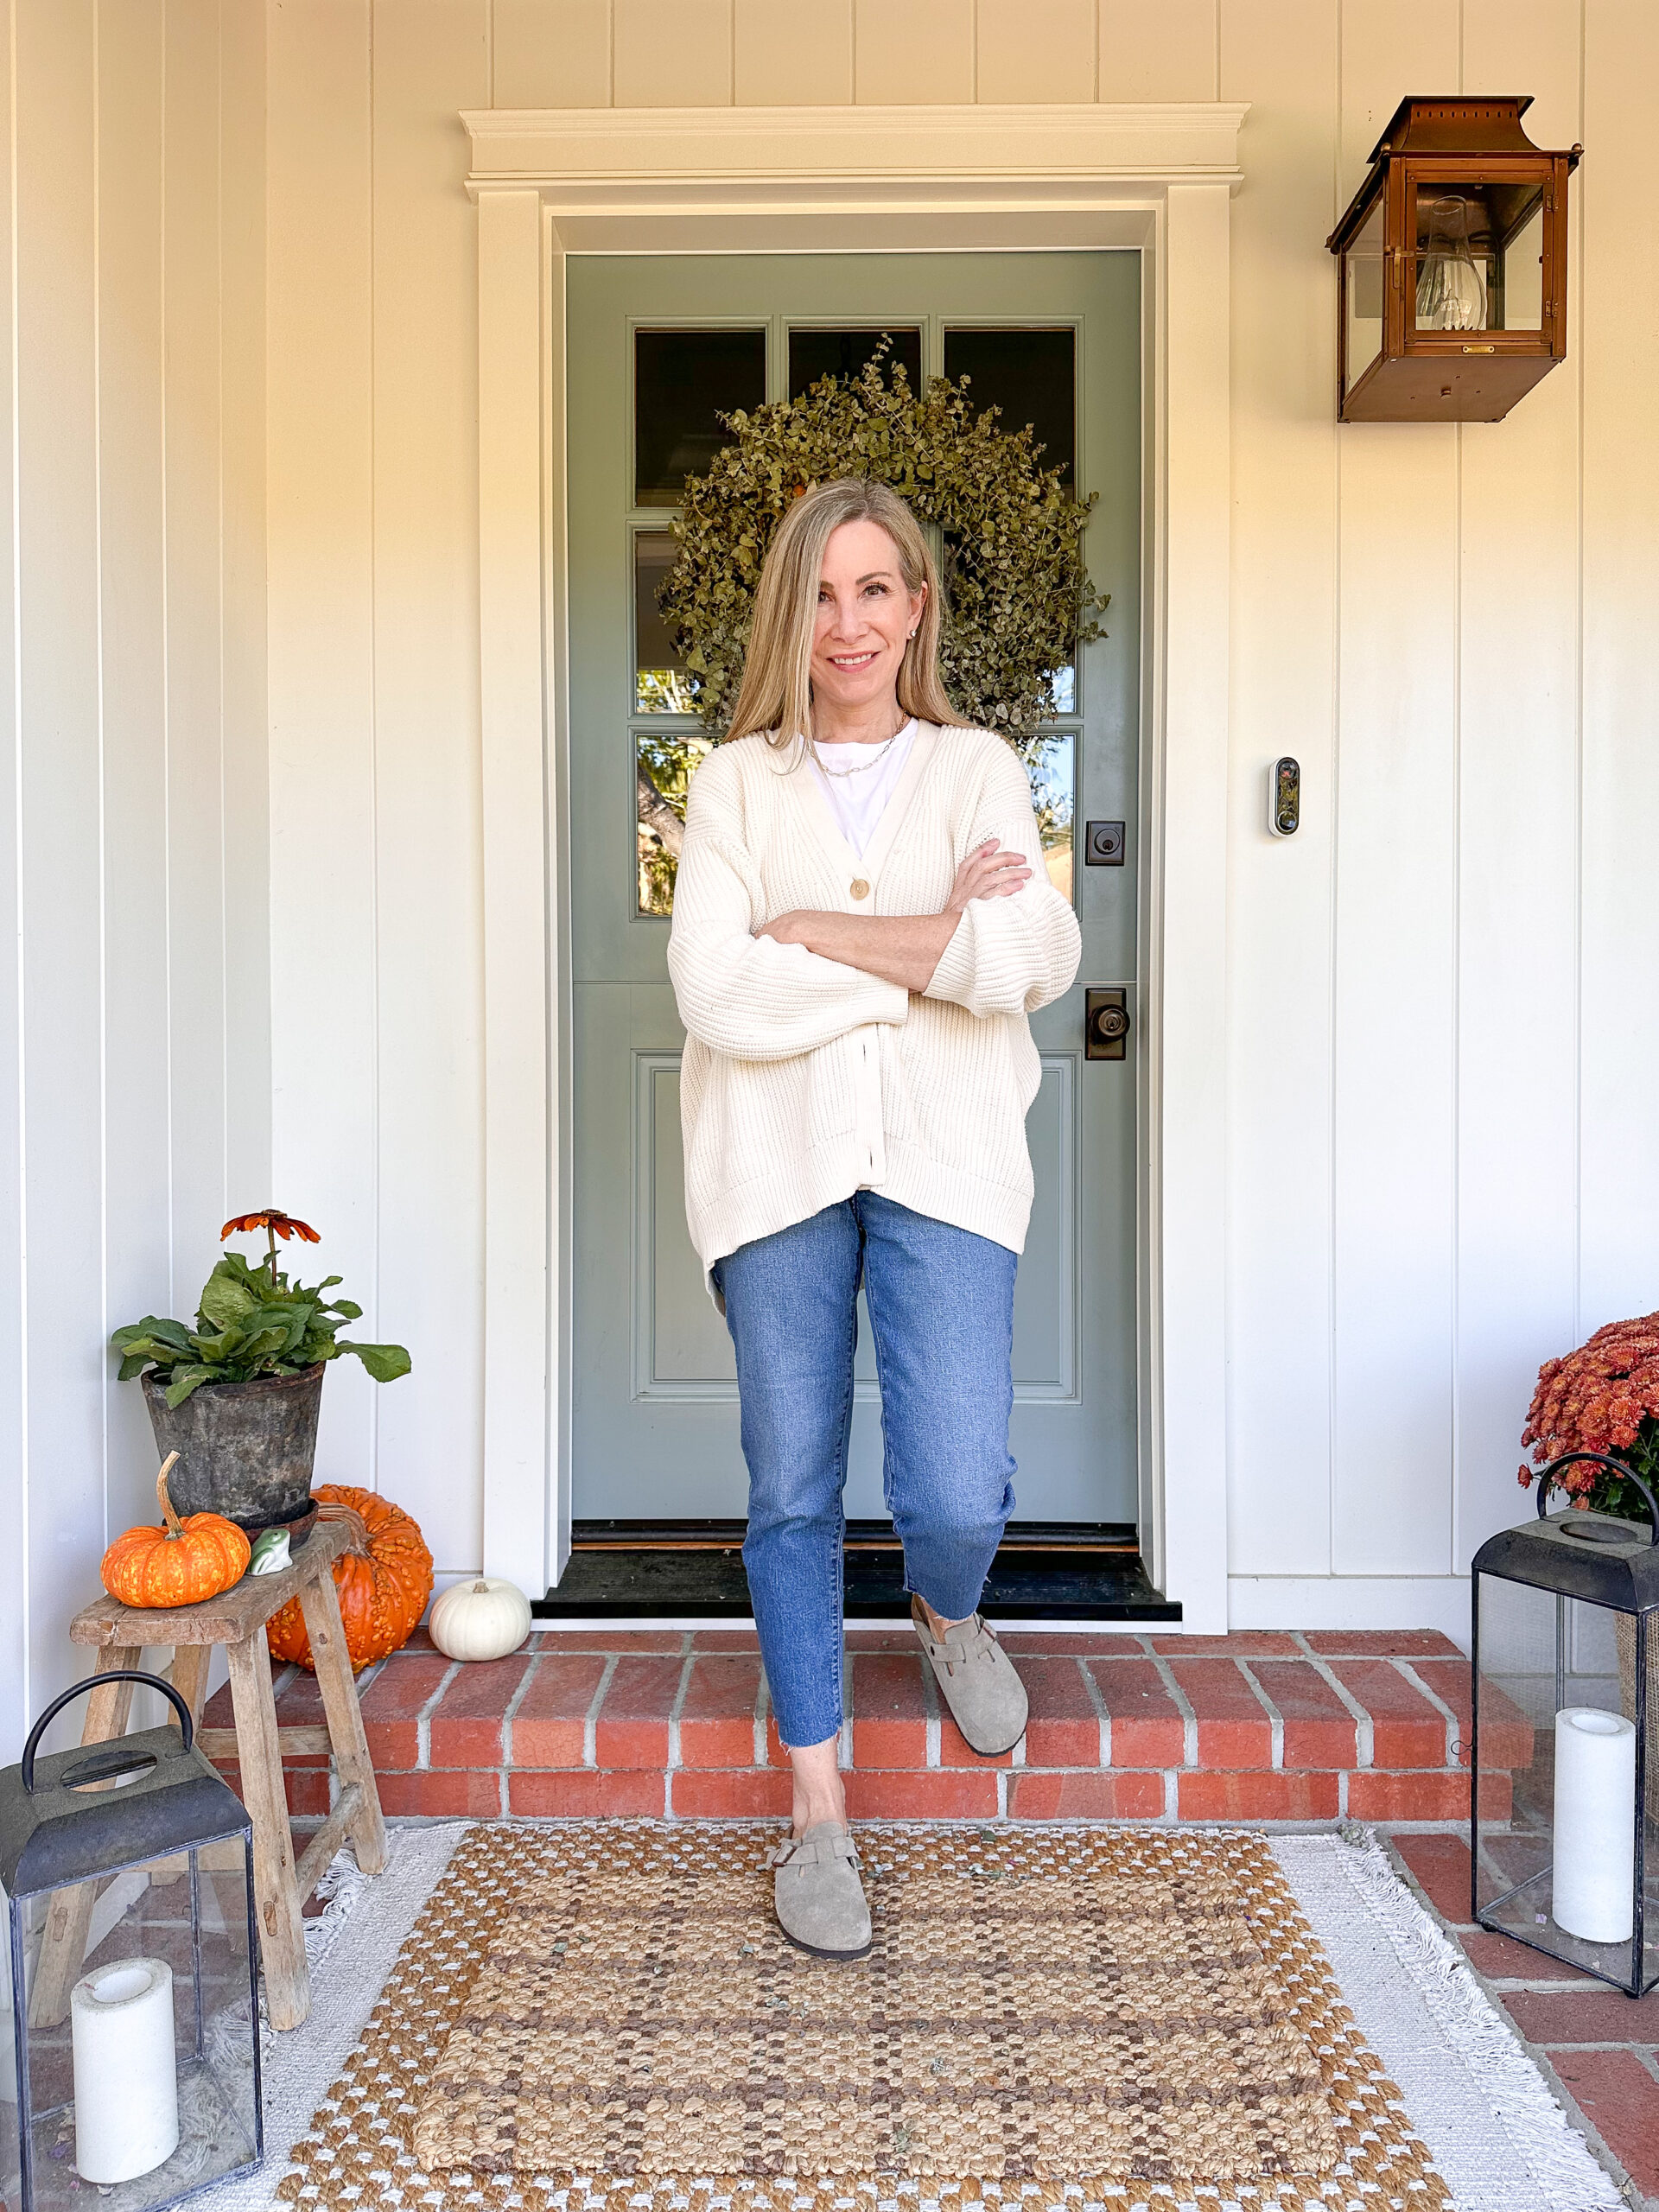 Woman standing on porch in front of blue Dutch door surrounded by fall decor.